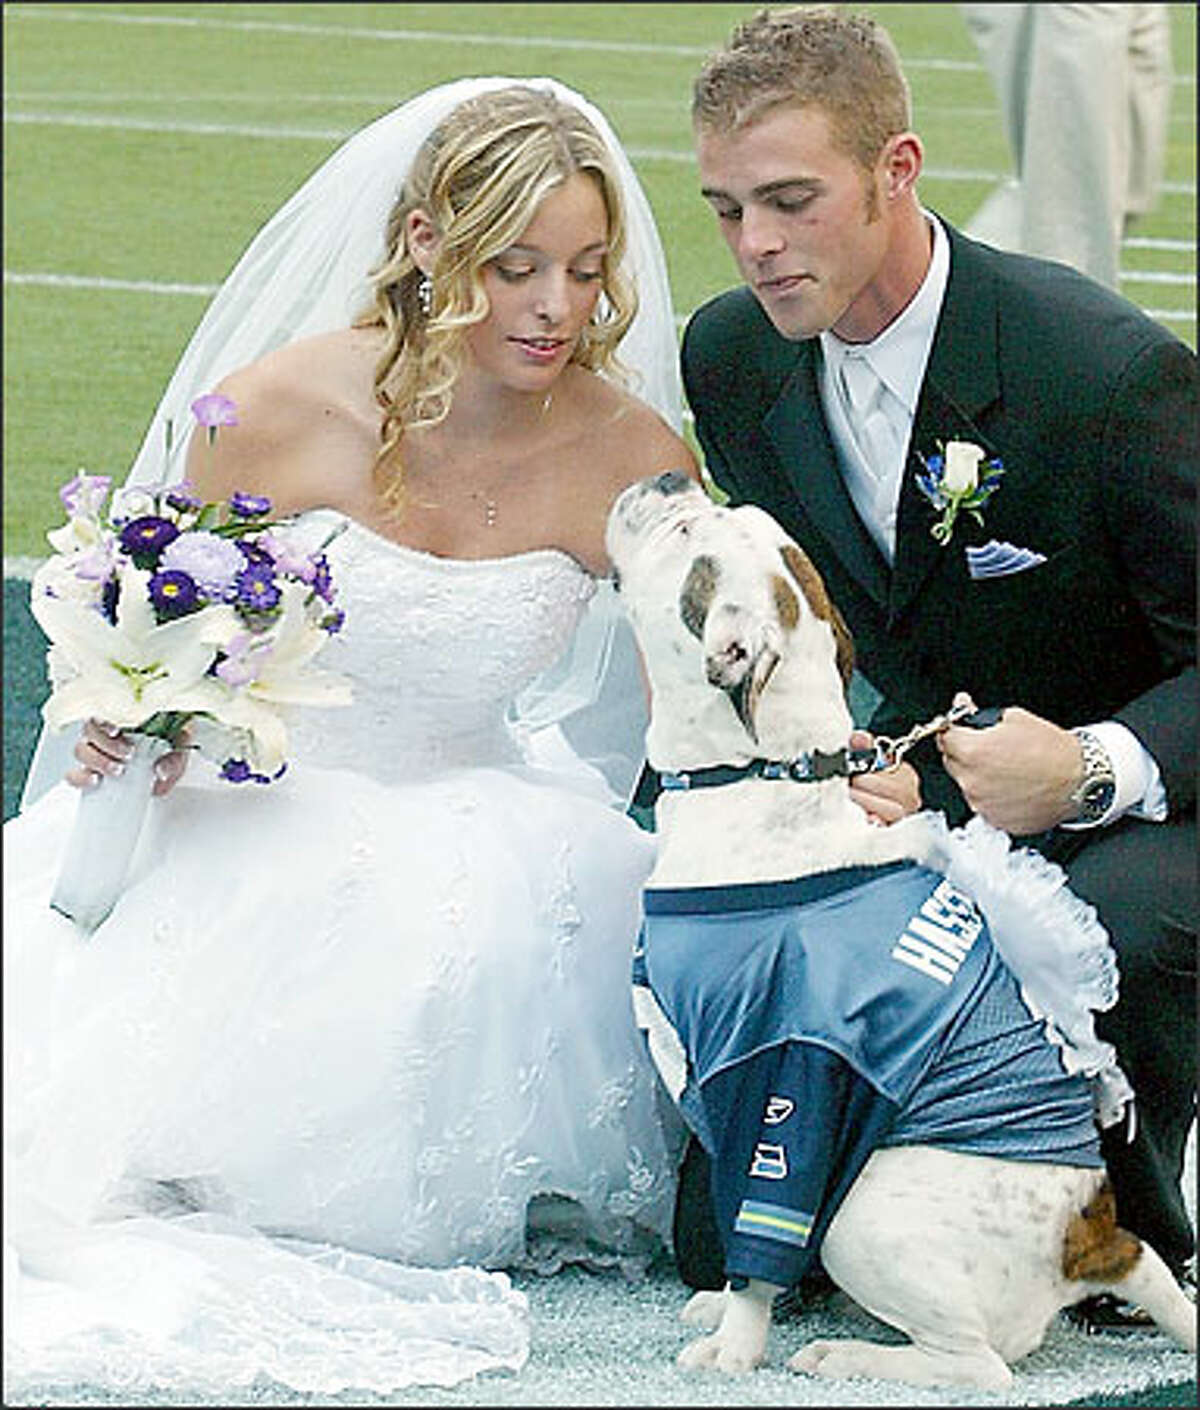 With Fumbles, their 8-month-old bulldog, serving as ring bearer, rabid Seattle Seahawks fans Chris Lundberg and Alexis Russo were married Sunday night in the first-ever wedding on the field at Qwest Field.